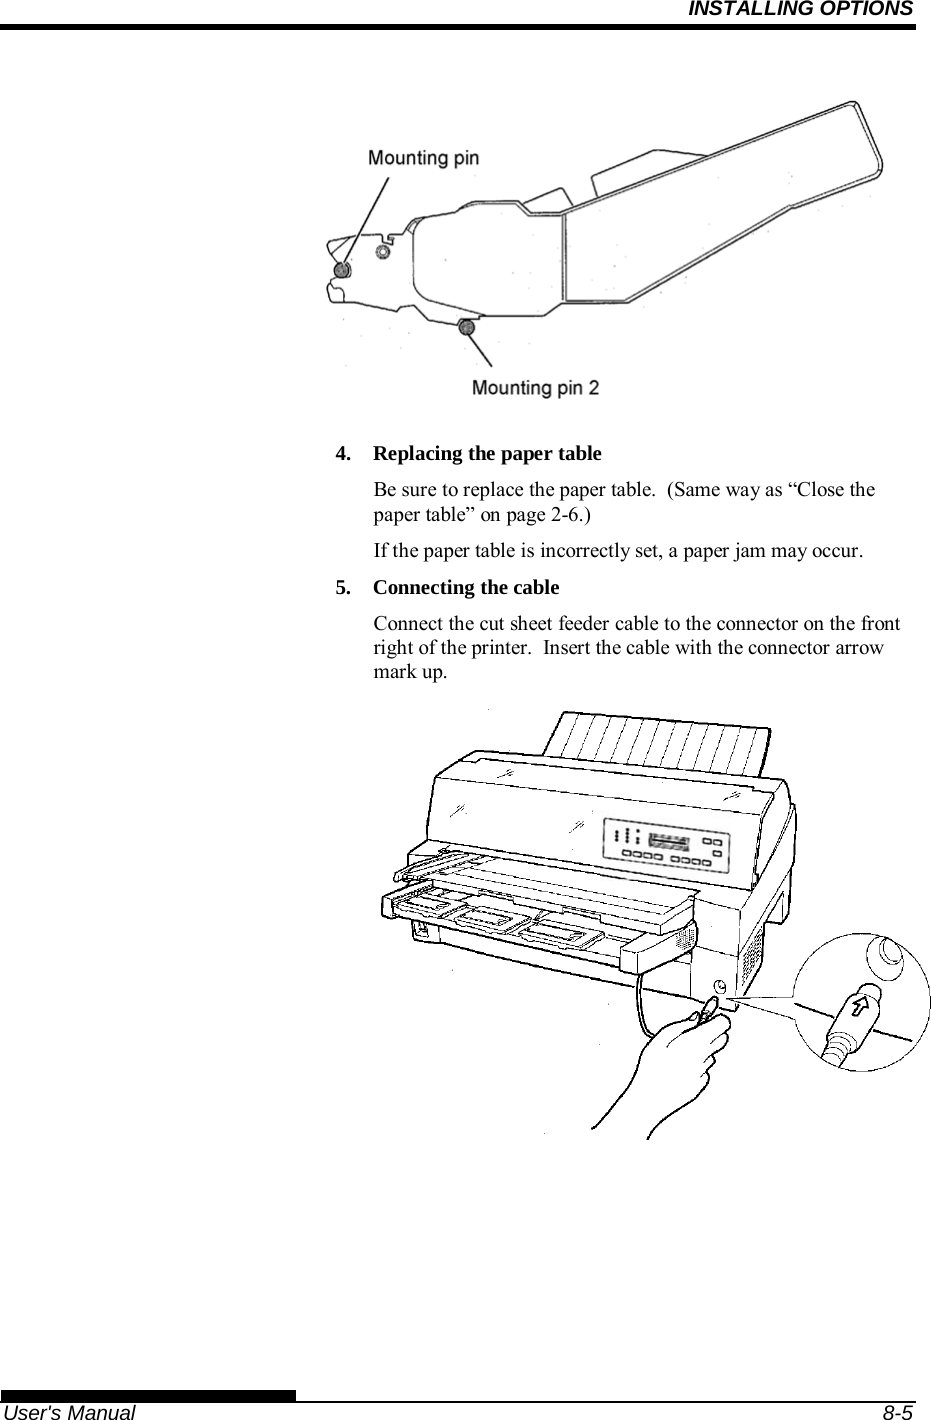 INSTALLING OPTIONS   User&apos;s Manual  8-5  4.  Replacing the paper table Be sure to replace the paper table.  (Same way as “Close the paper table” on page 2-6.) If the paper table is incorrectly set, a paper jam may occur. 5.  Connecting the cable Connect the cut sheet feeder cable to the connector on the front right of the printer.  Insert the cable with the connector arrow mark up.   